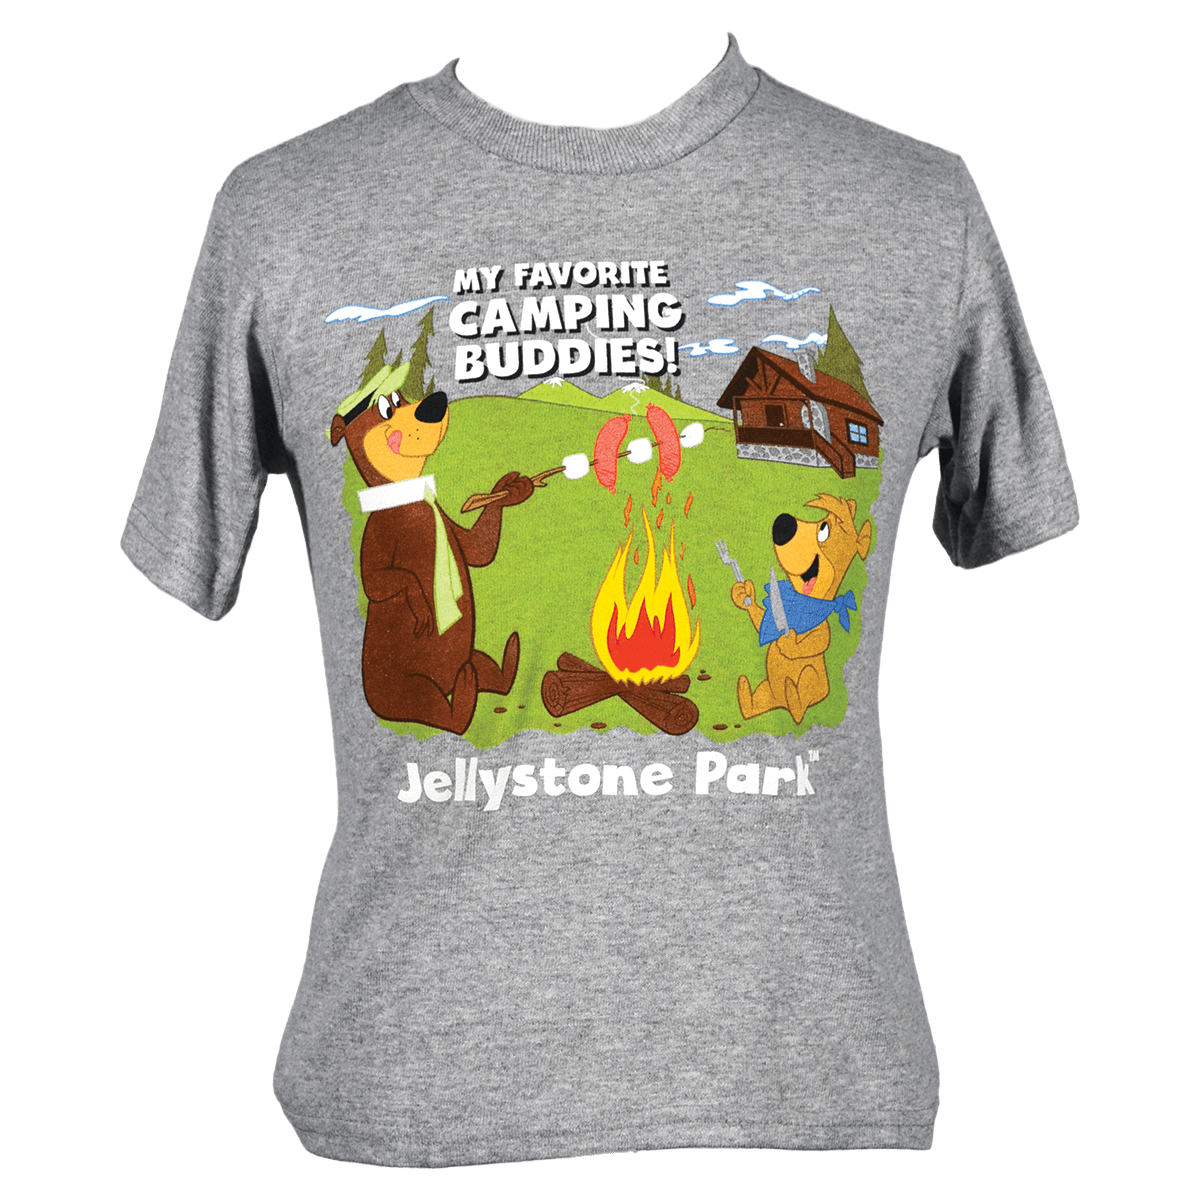 Jellystone Park Camping Buddies Infant T-Shirt (3T)